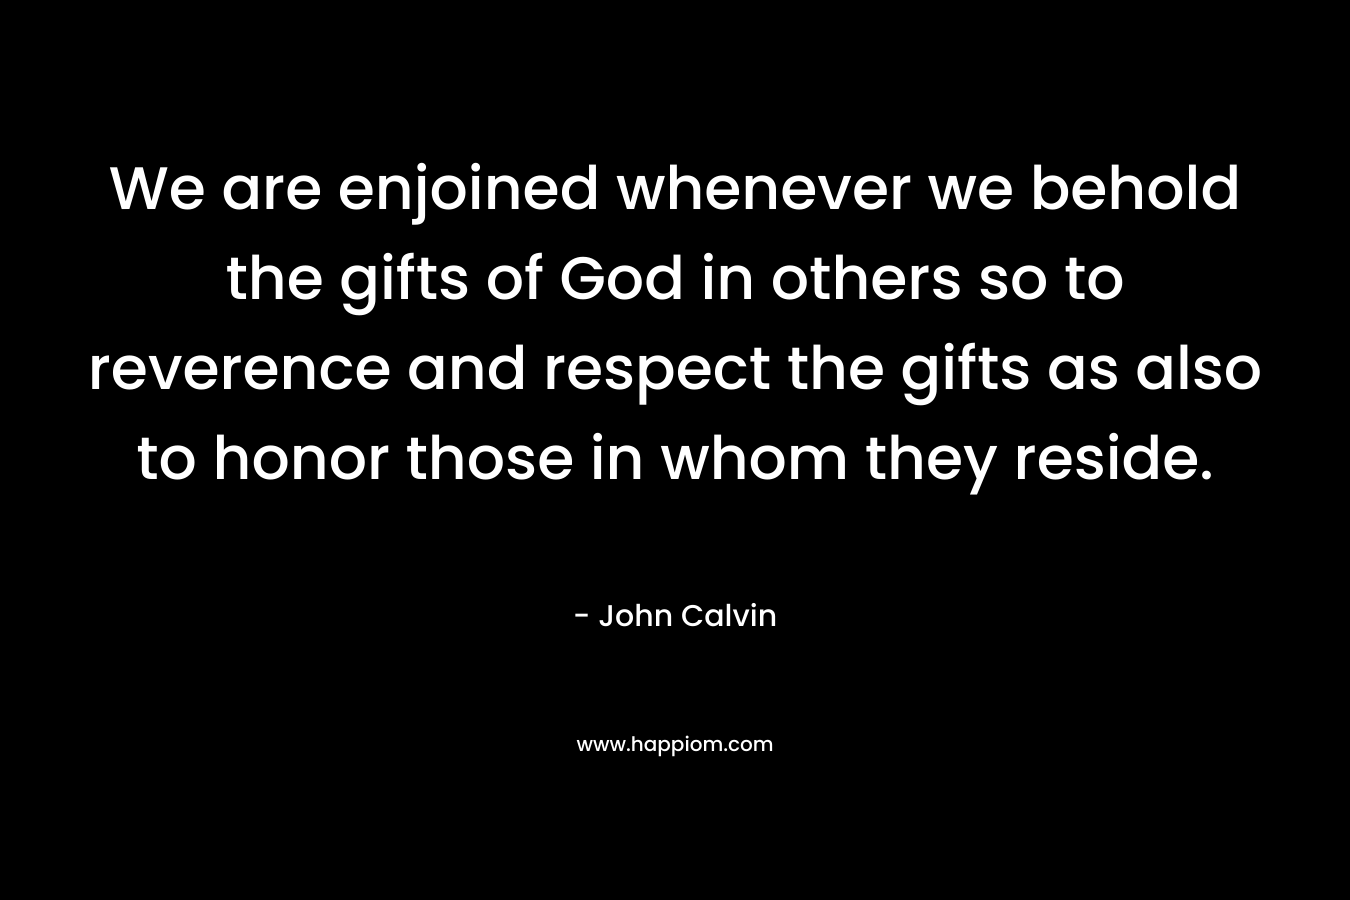 We are enjoined whenever we behold the gifts of God in others so to reverence and respect the gifts as also to honor those in whom they reside. – John Calvin